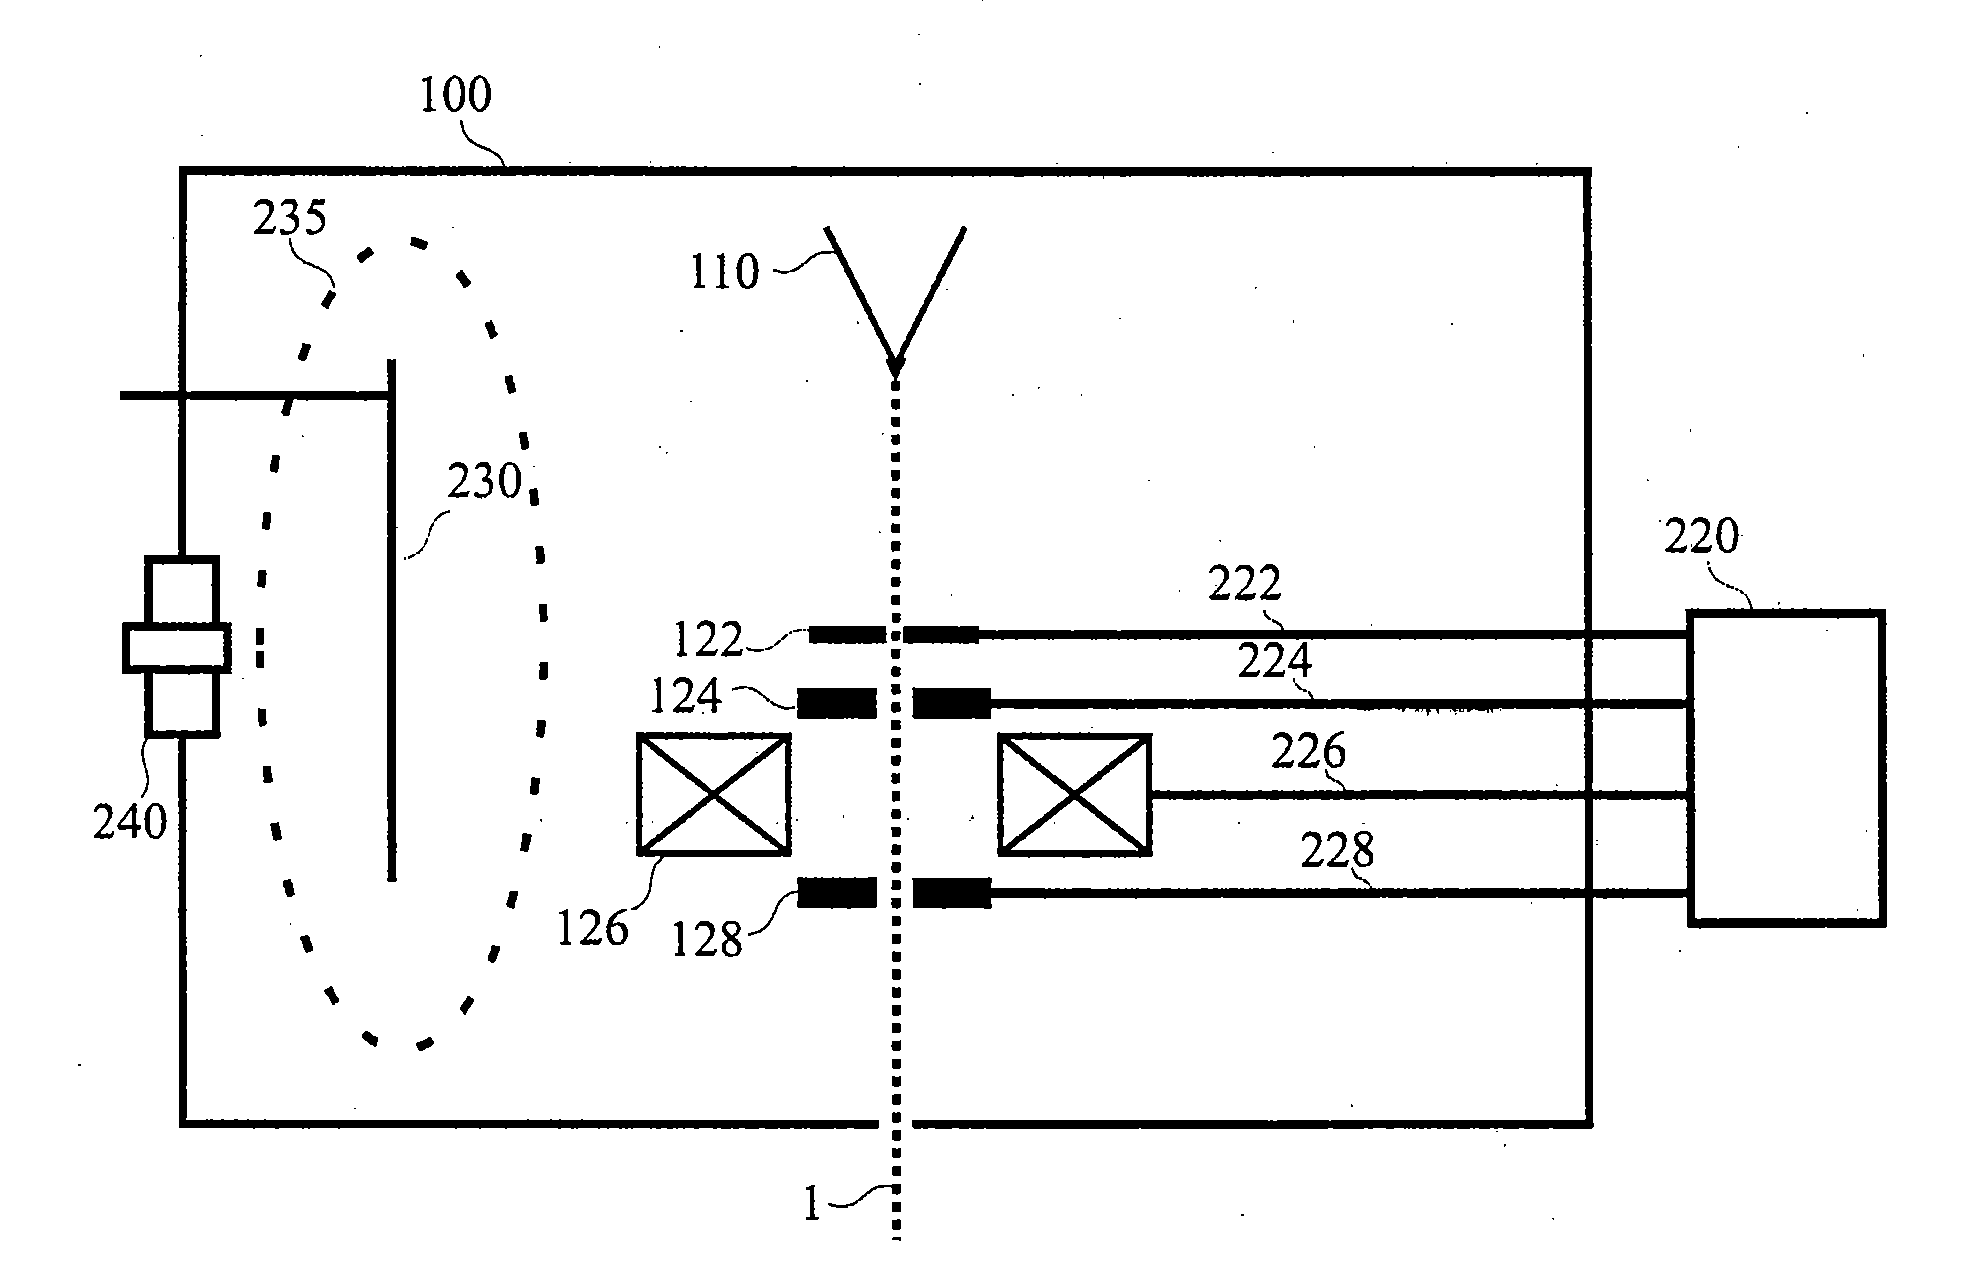 Method and apparatus of pretreatment of an electron gun chamber